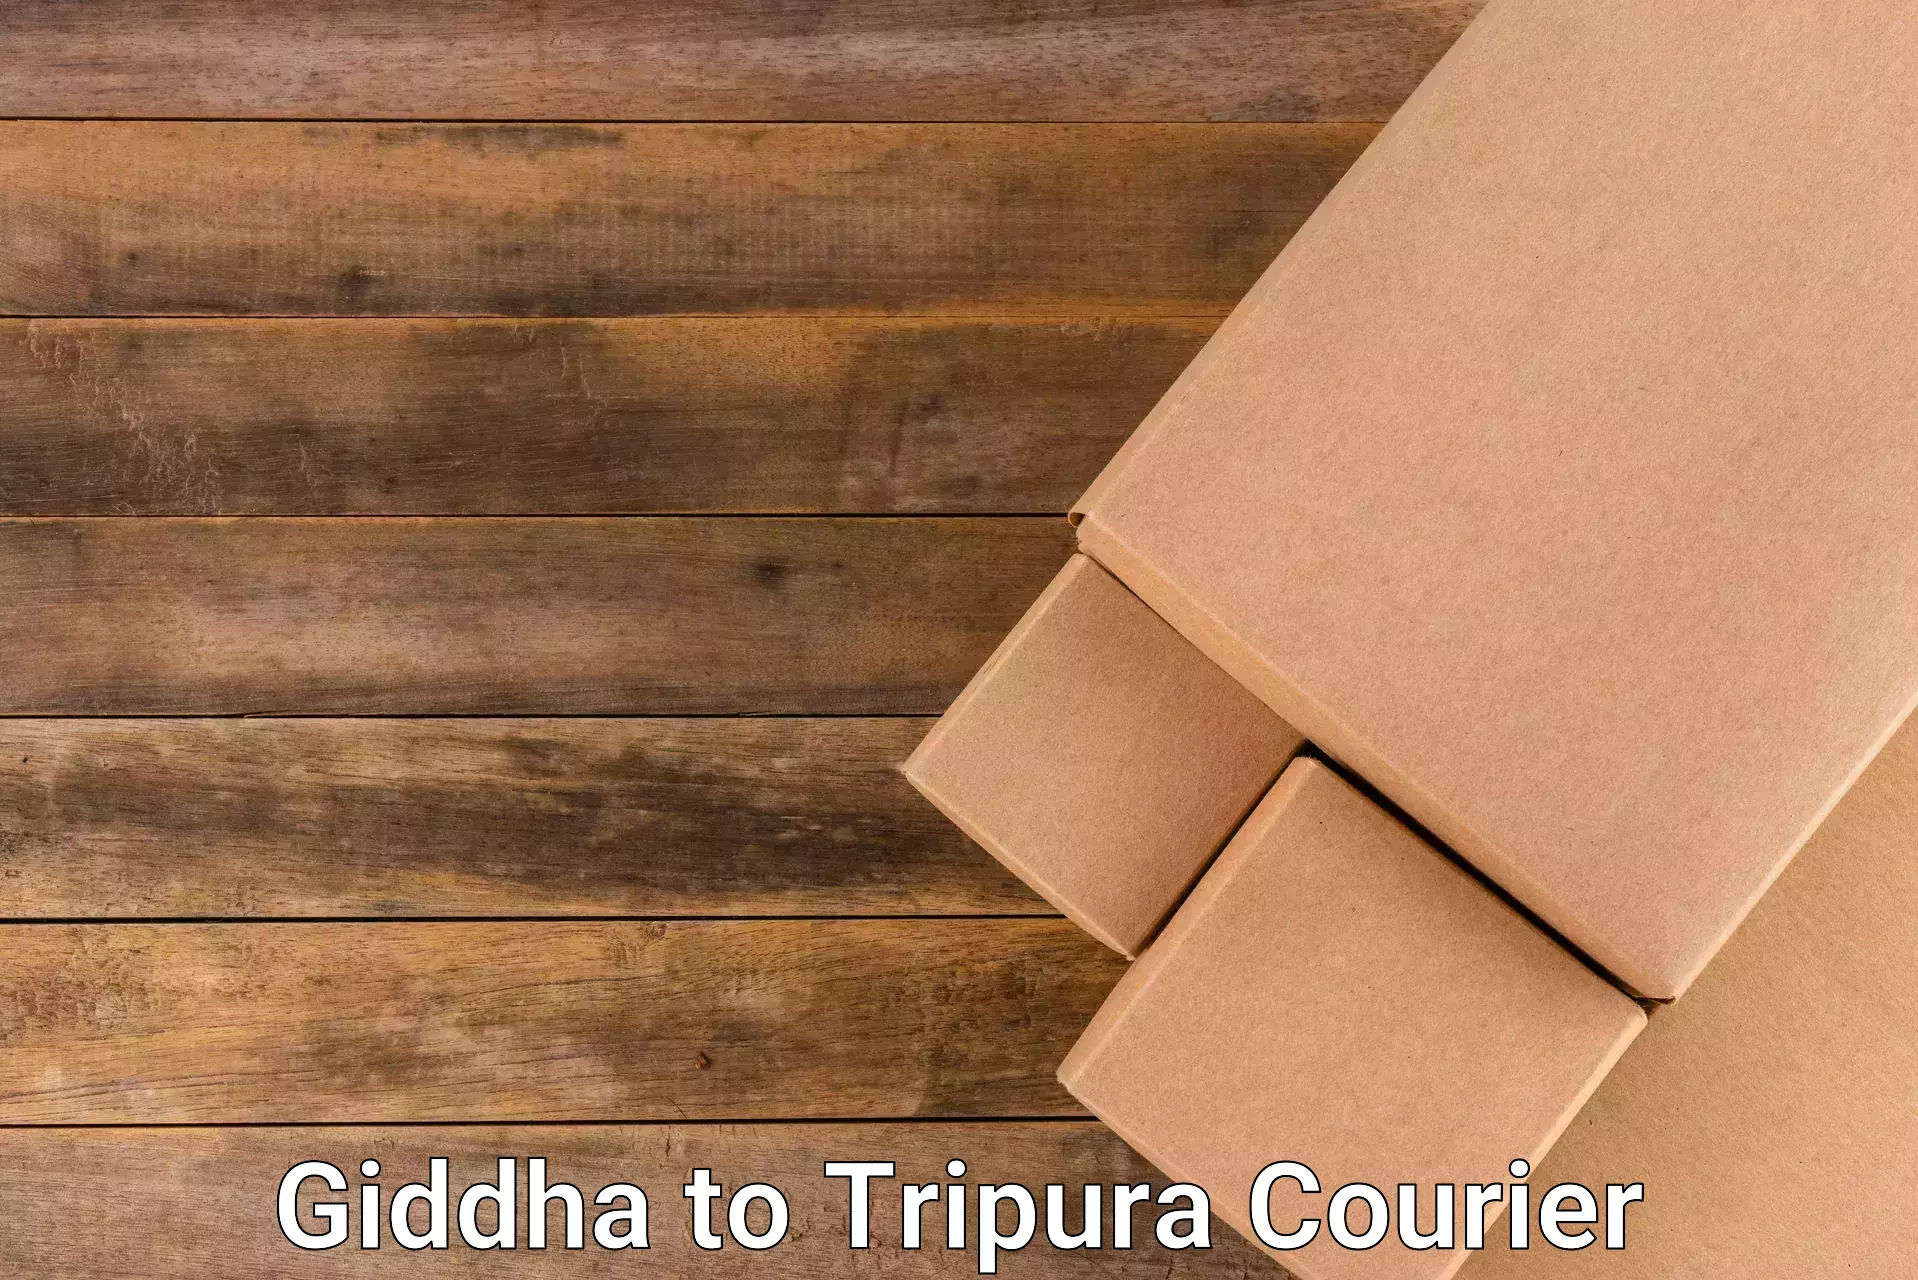 Affordable parcel service in Giddha to Tripura